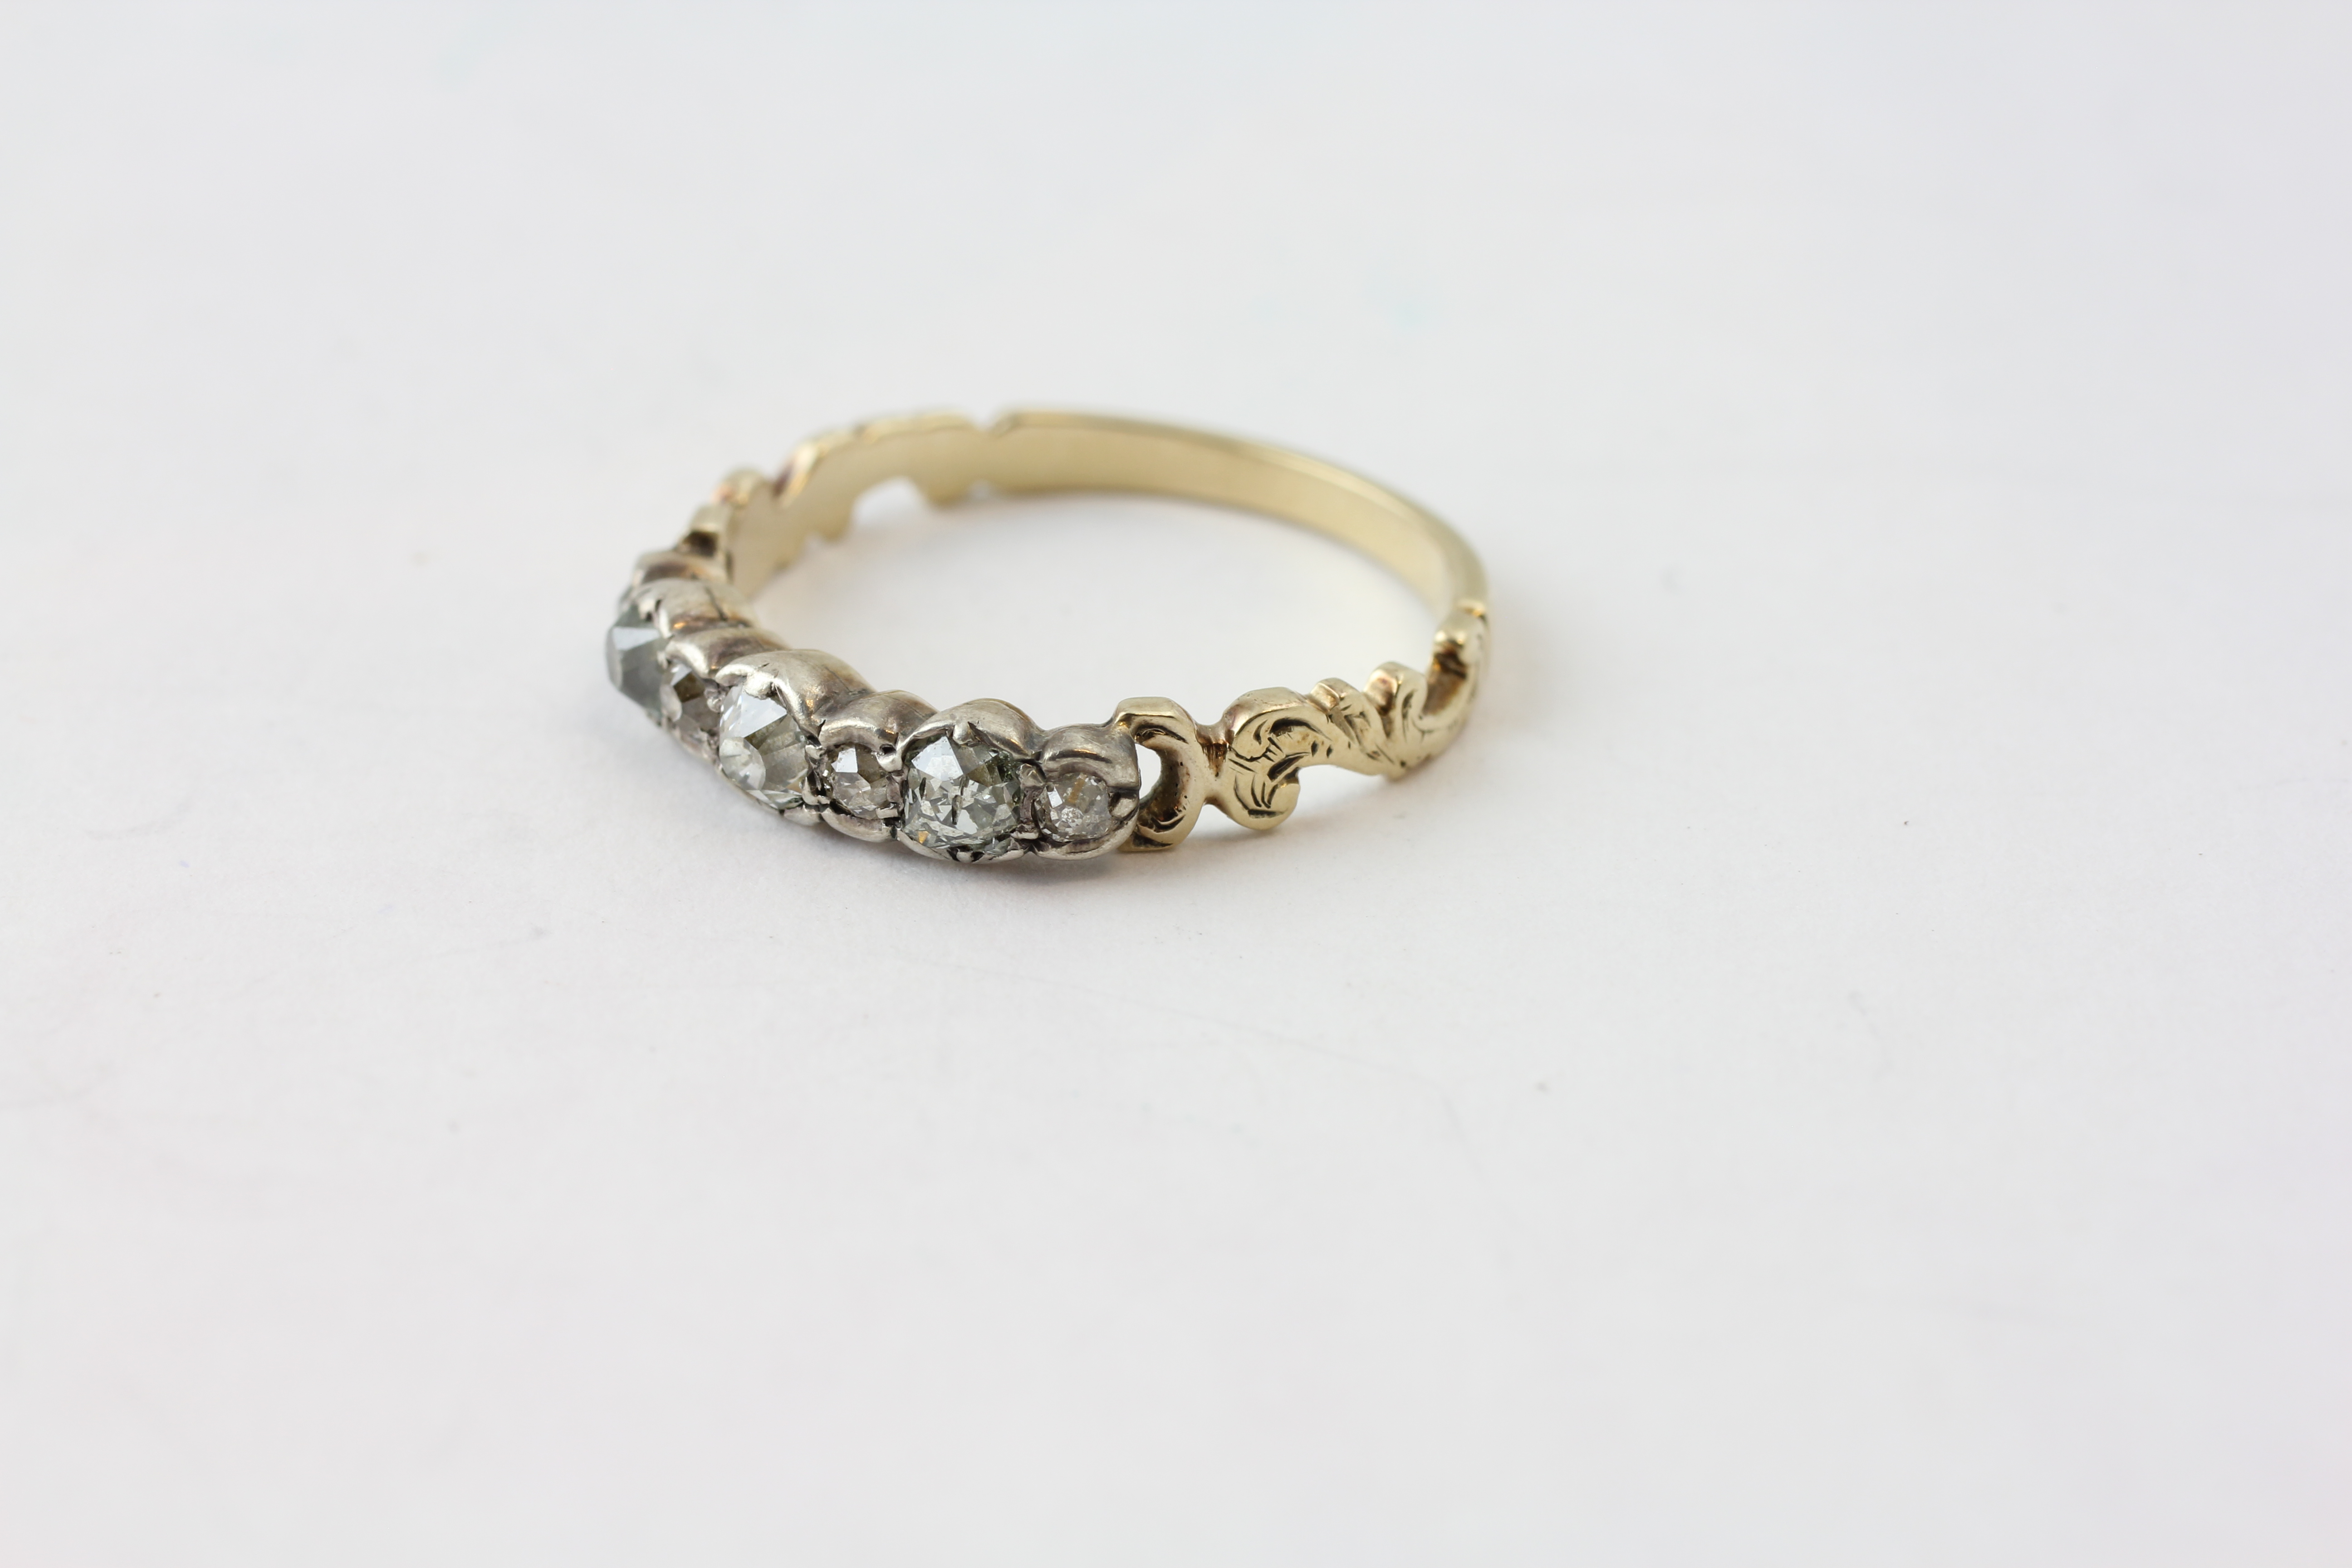 A SEVEN STONE DIAMOND RING, THE LARGEST STONE APPROX. - Image 3 of 5